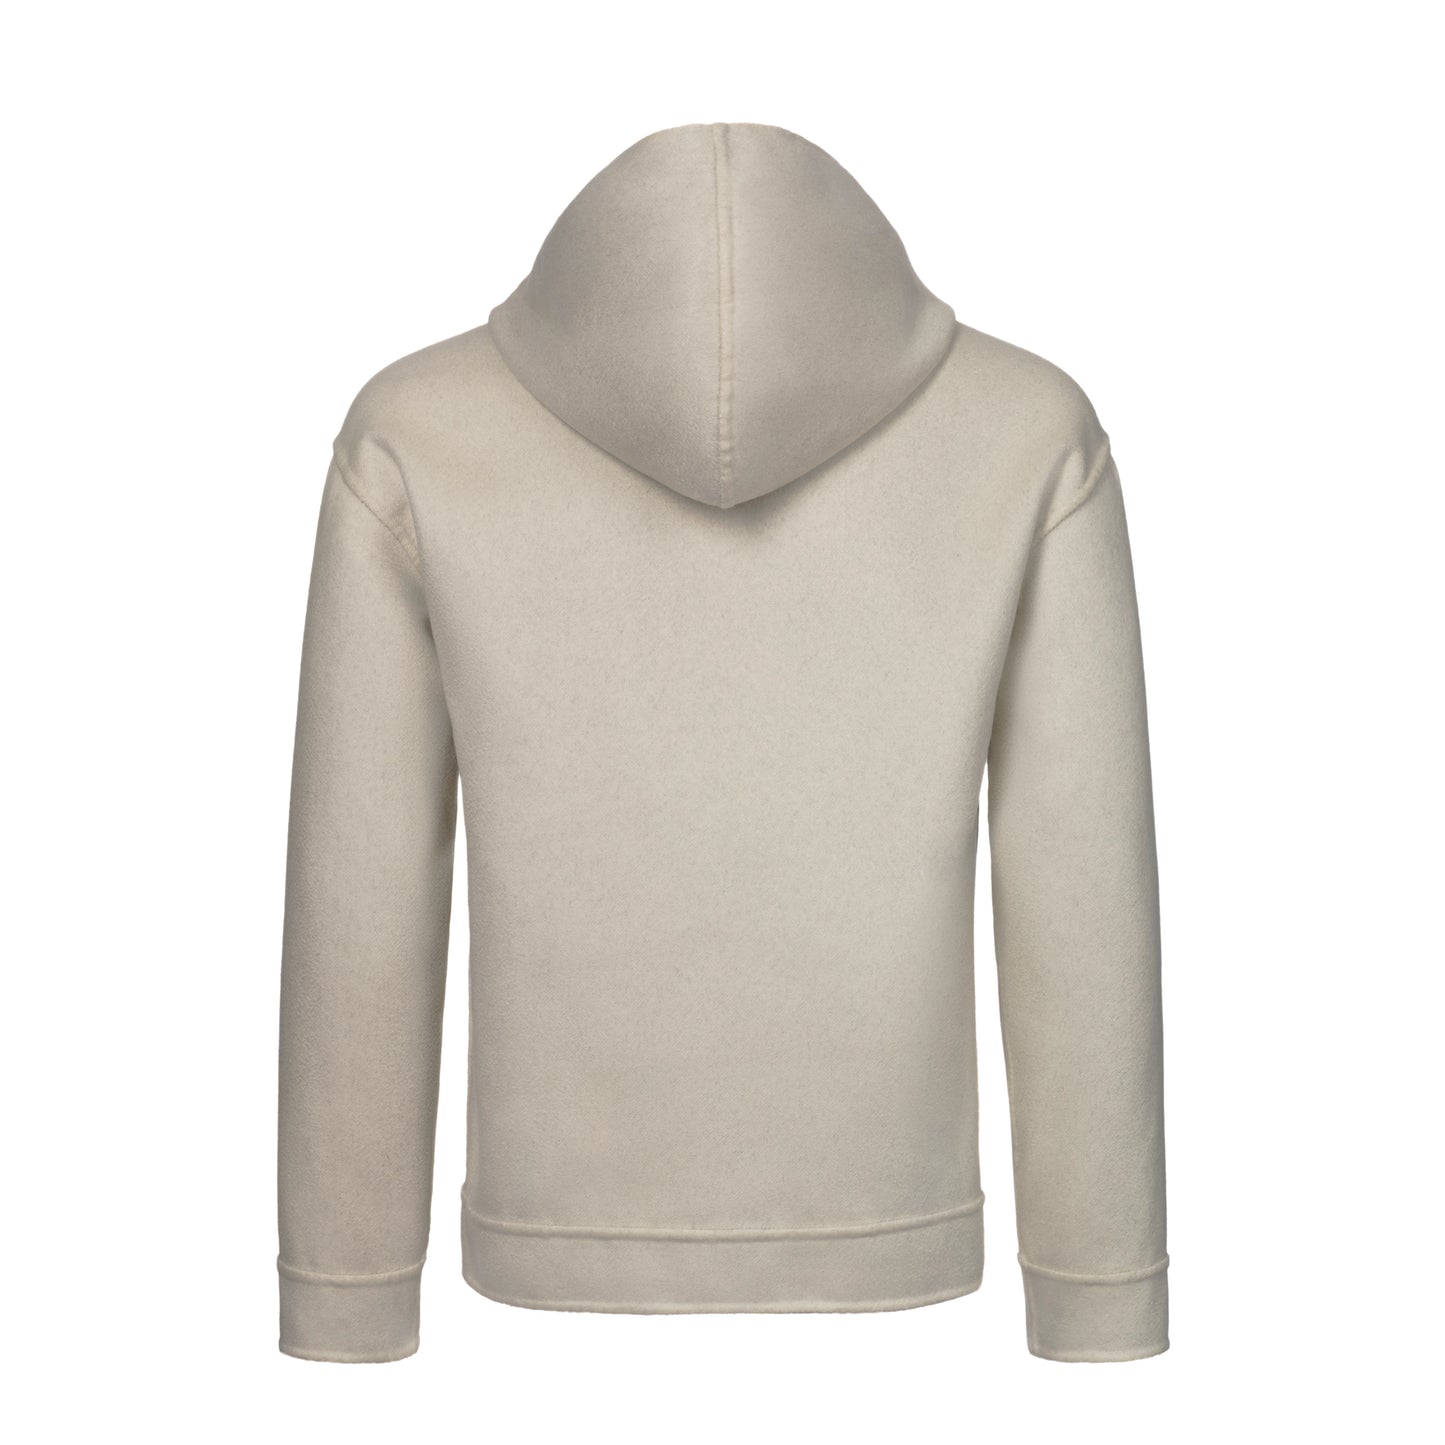 Reversible Cashmere Hooded Jacket in Light Grey and Beige